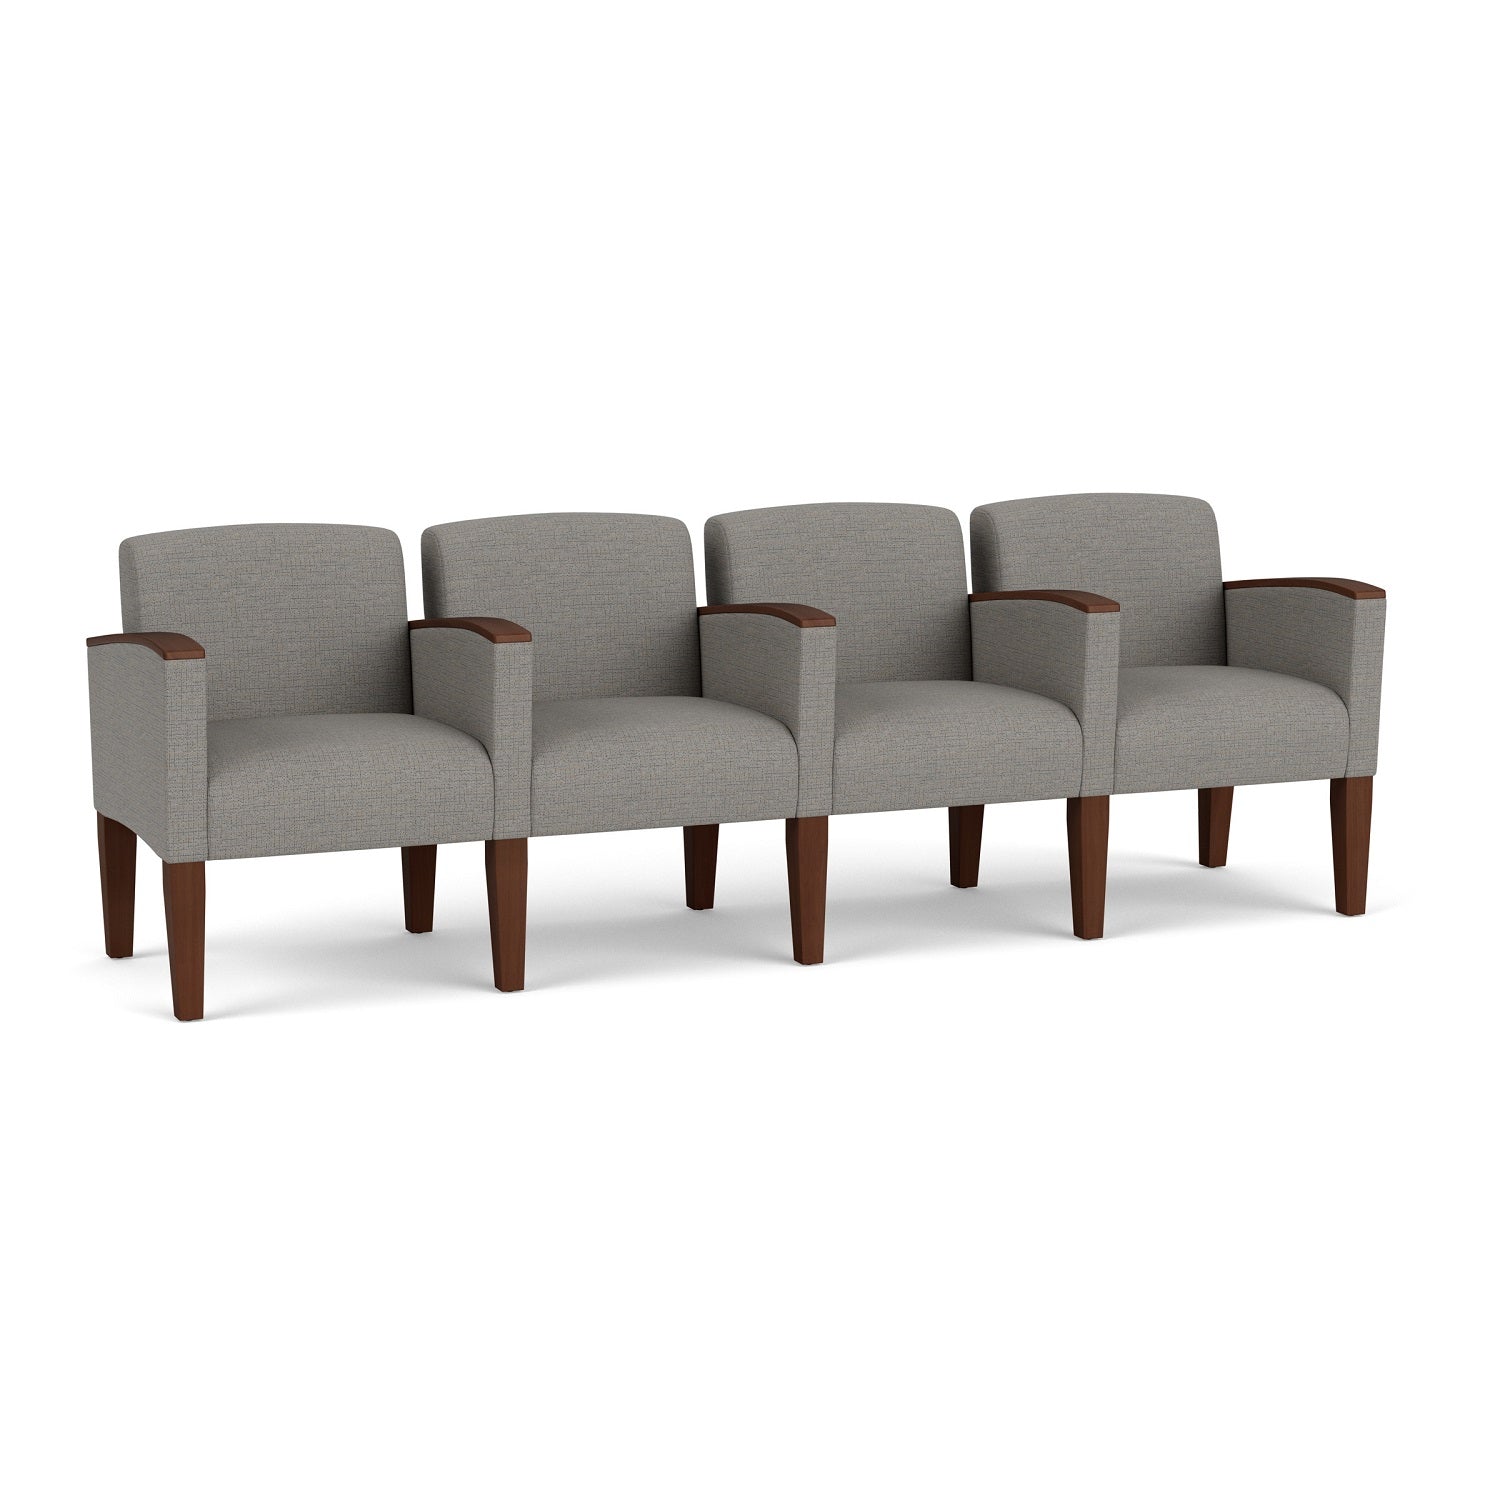 Belmont Collection Reception Seating, 4 Seats with Center Arms, Designer Fabric Upholstery, FREE SHIPPING